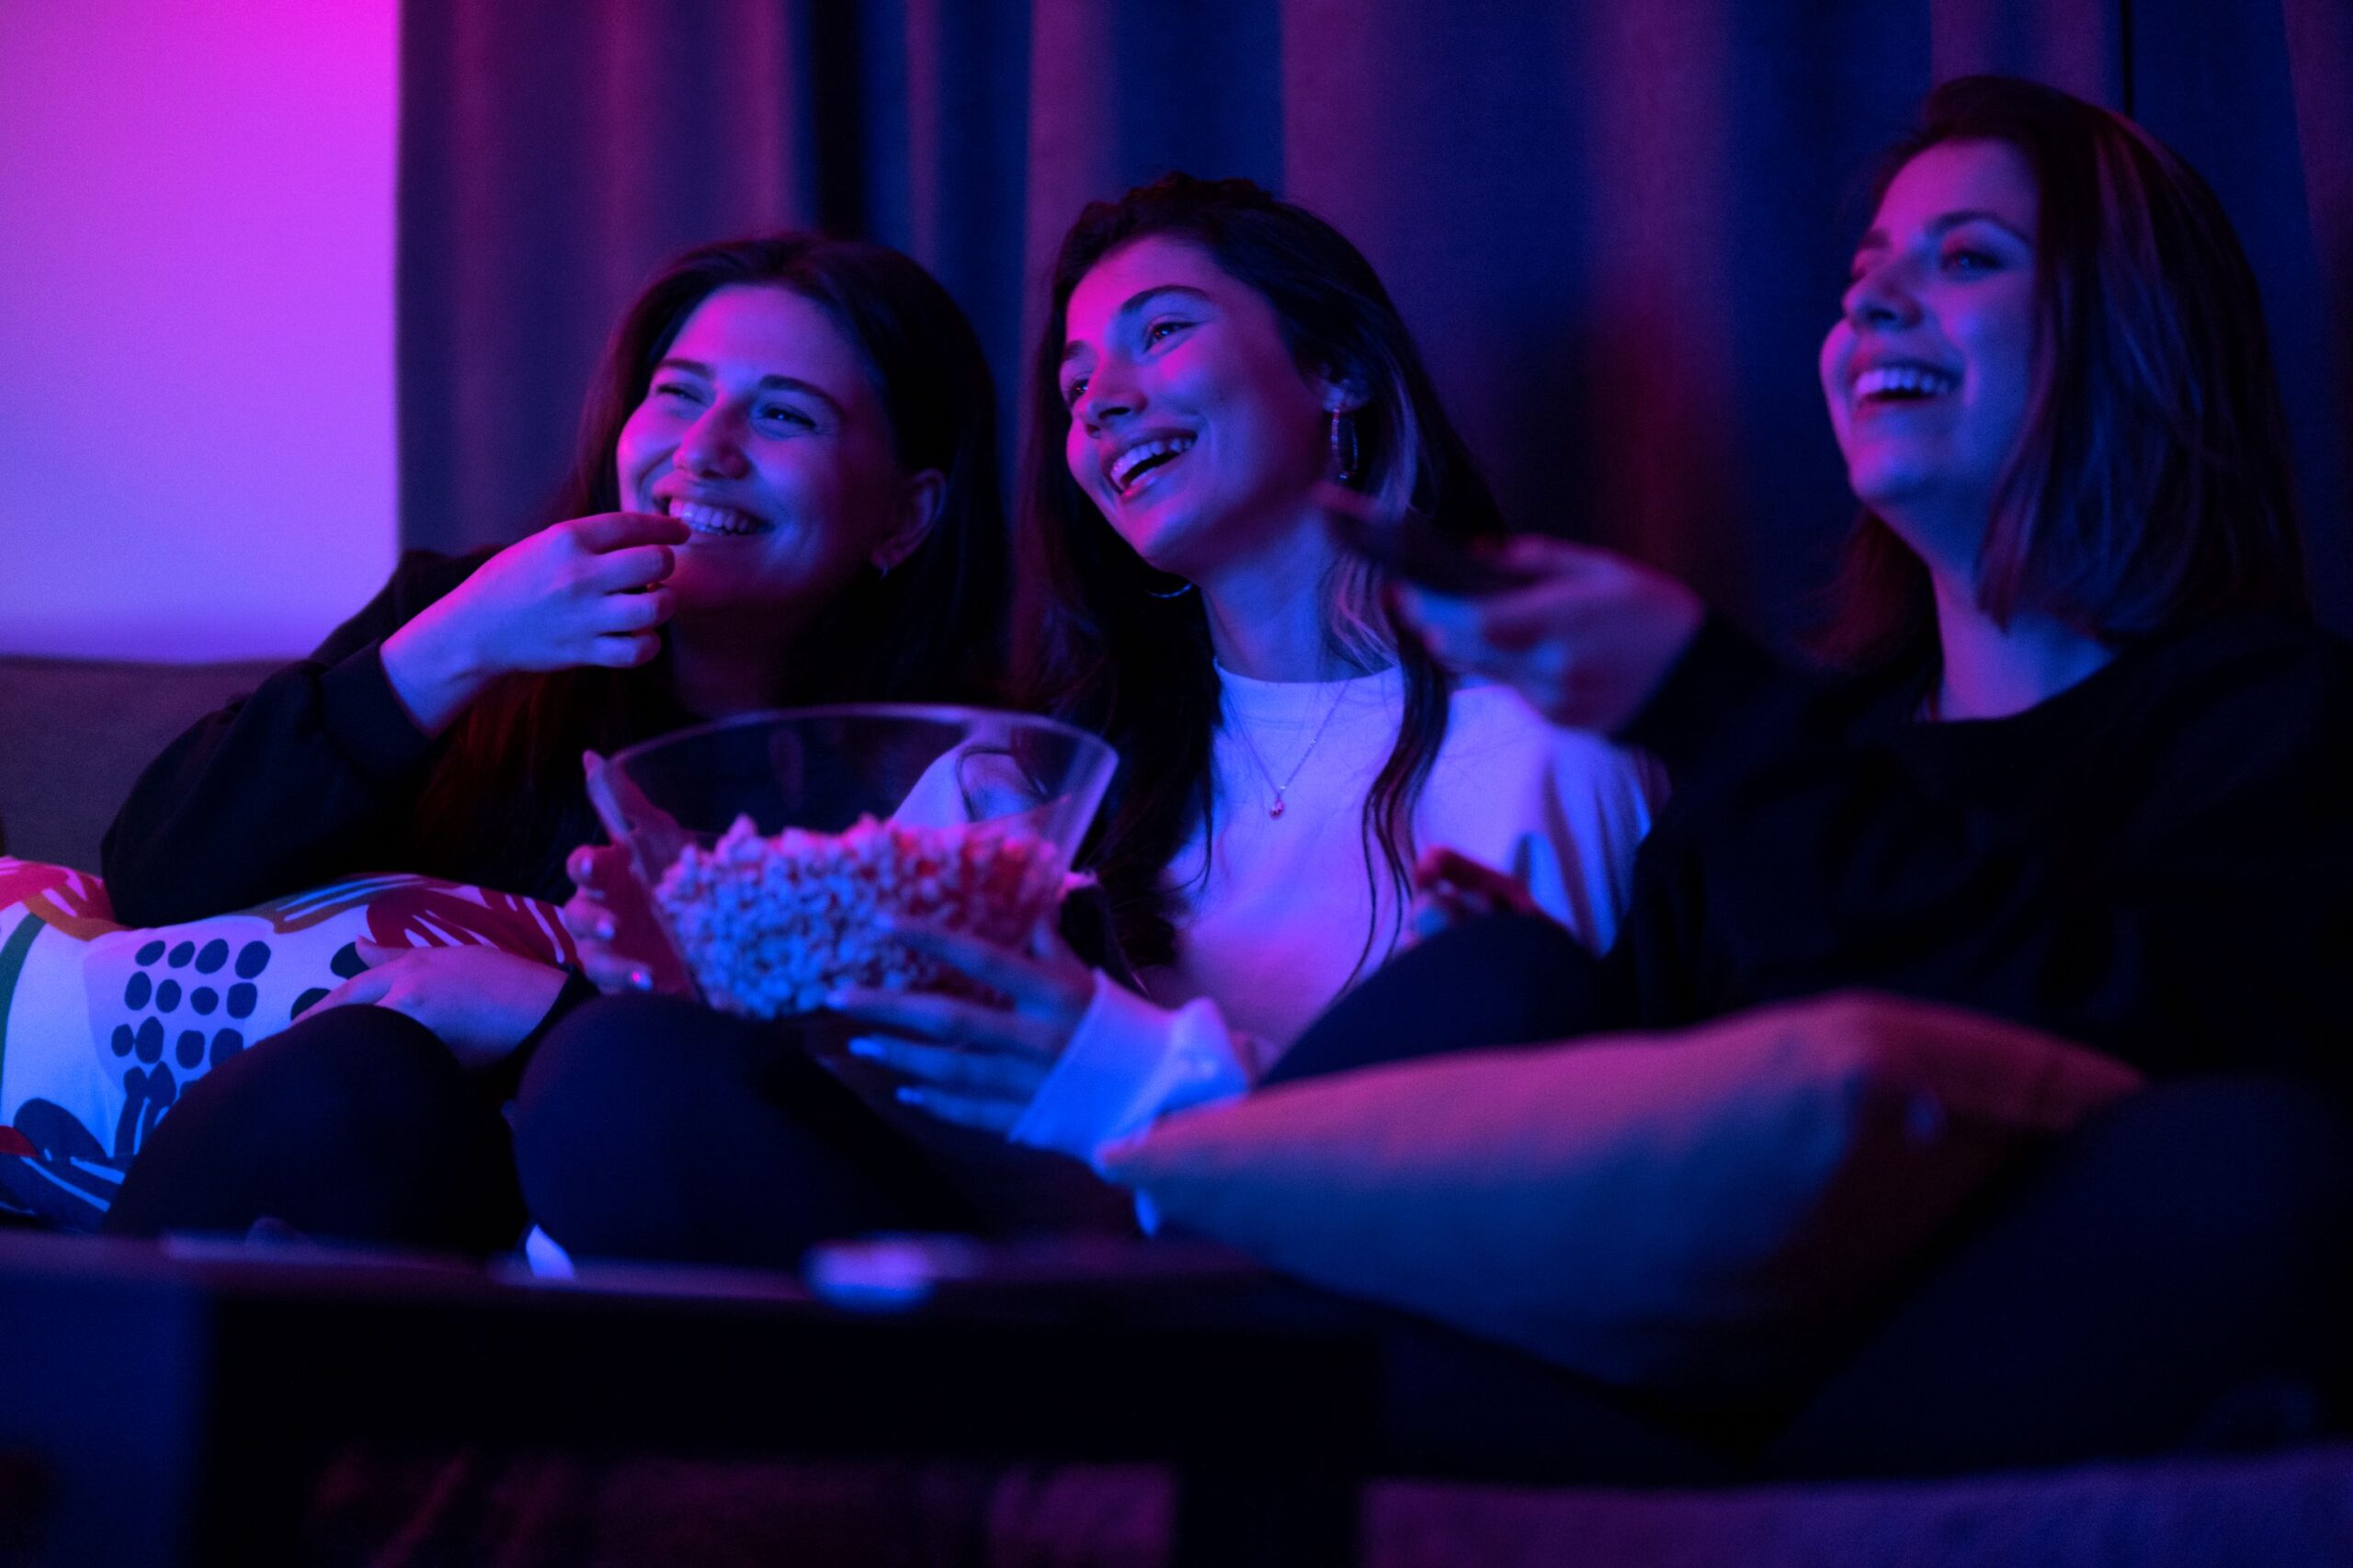 Three women sitting on a couch laughing and eating popcorn together in purple ambiance